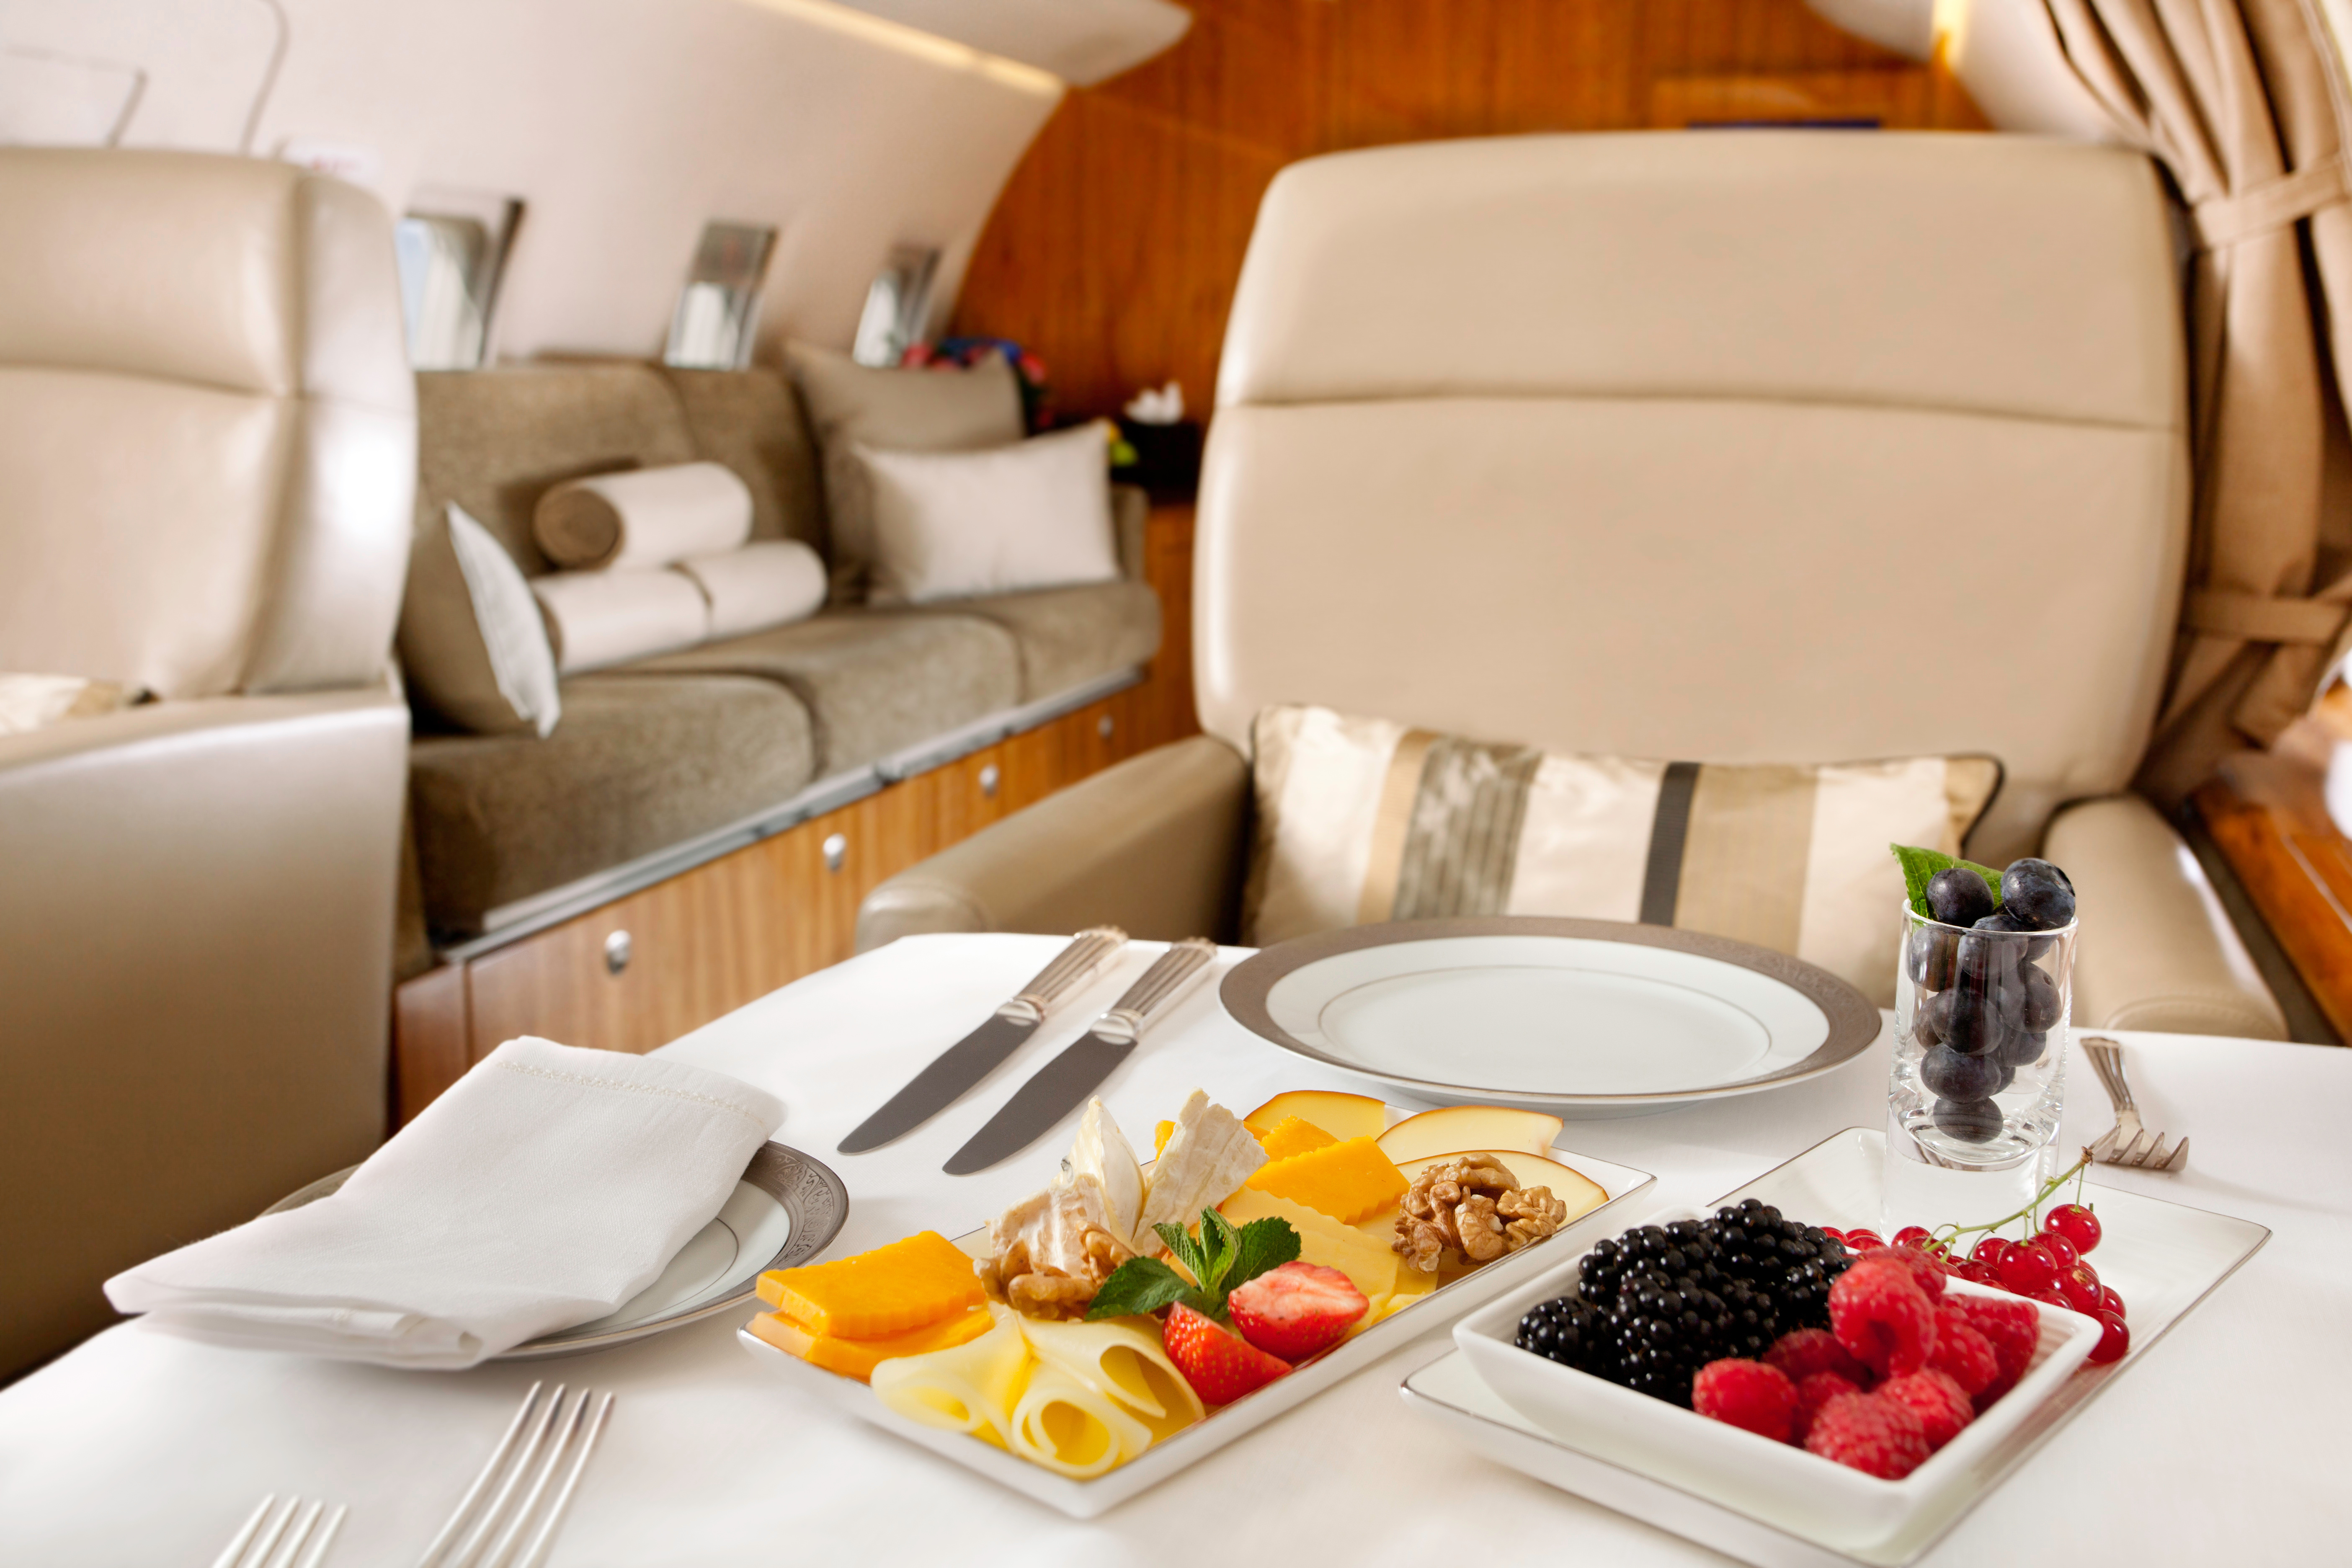 Food served on board of business class airplane.